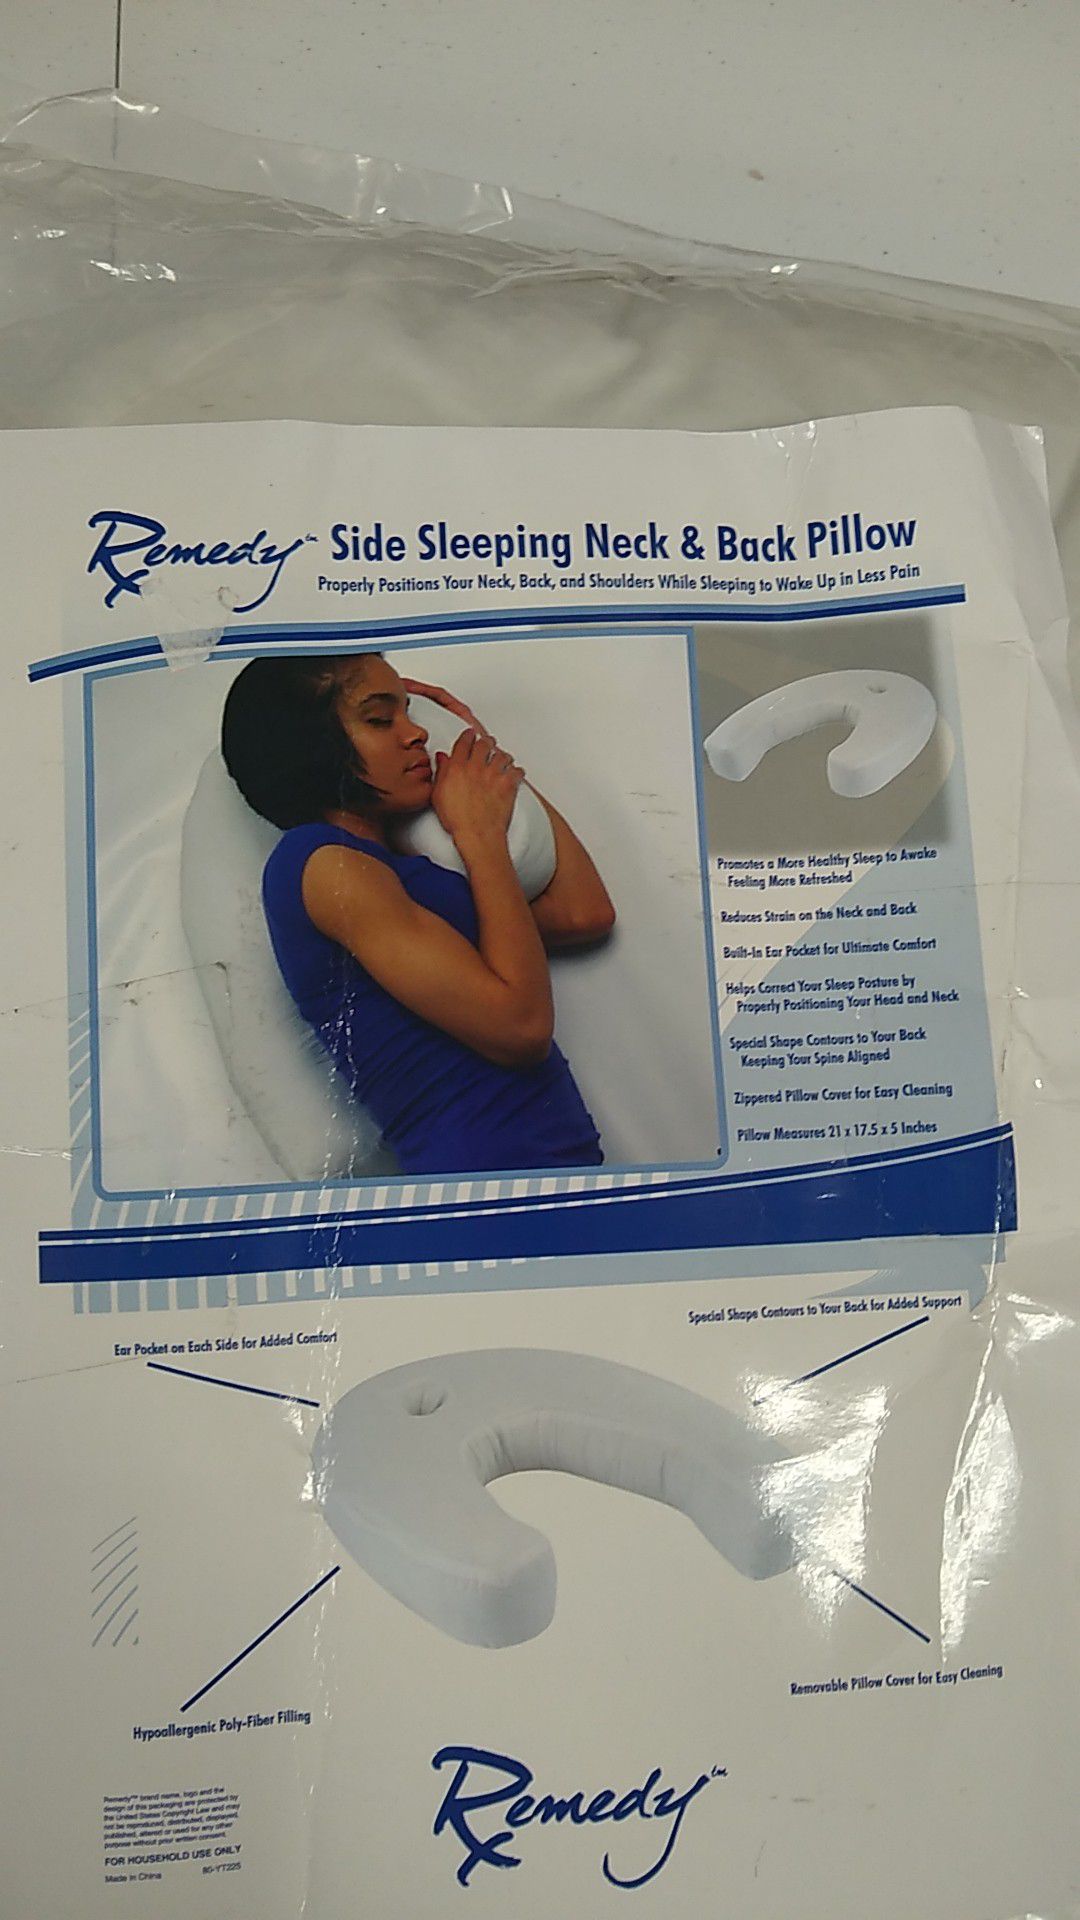 Side sleeper neck and back pillow